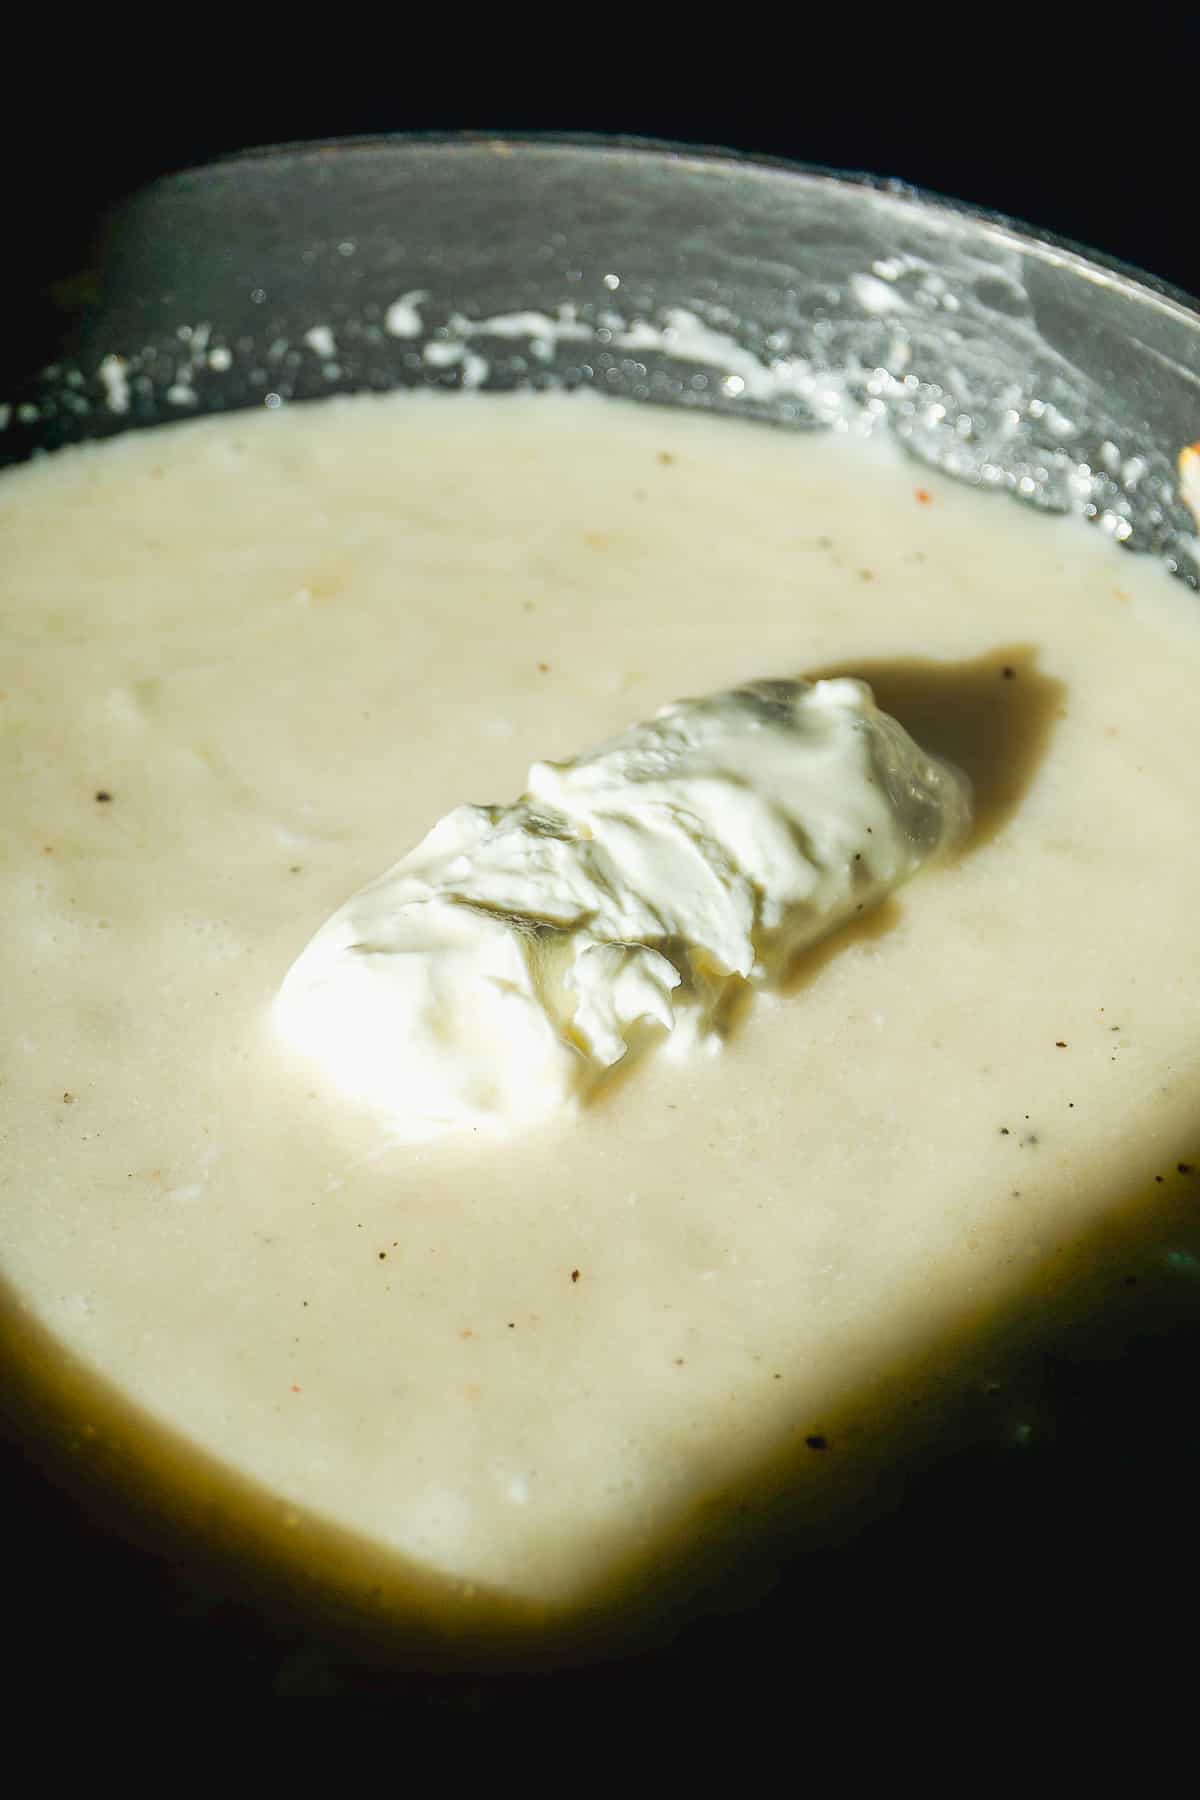 Goat cheese melting into s milk based sauce.